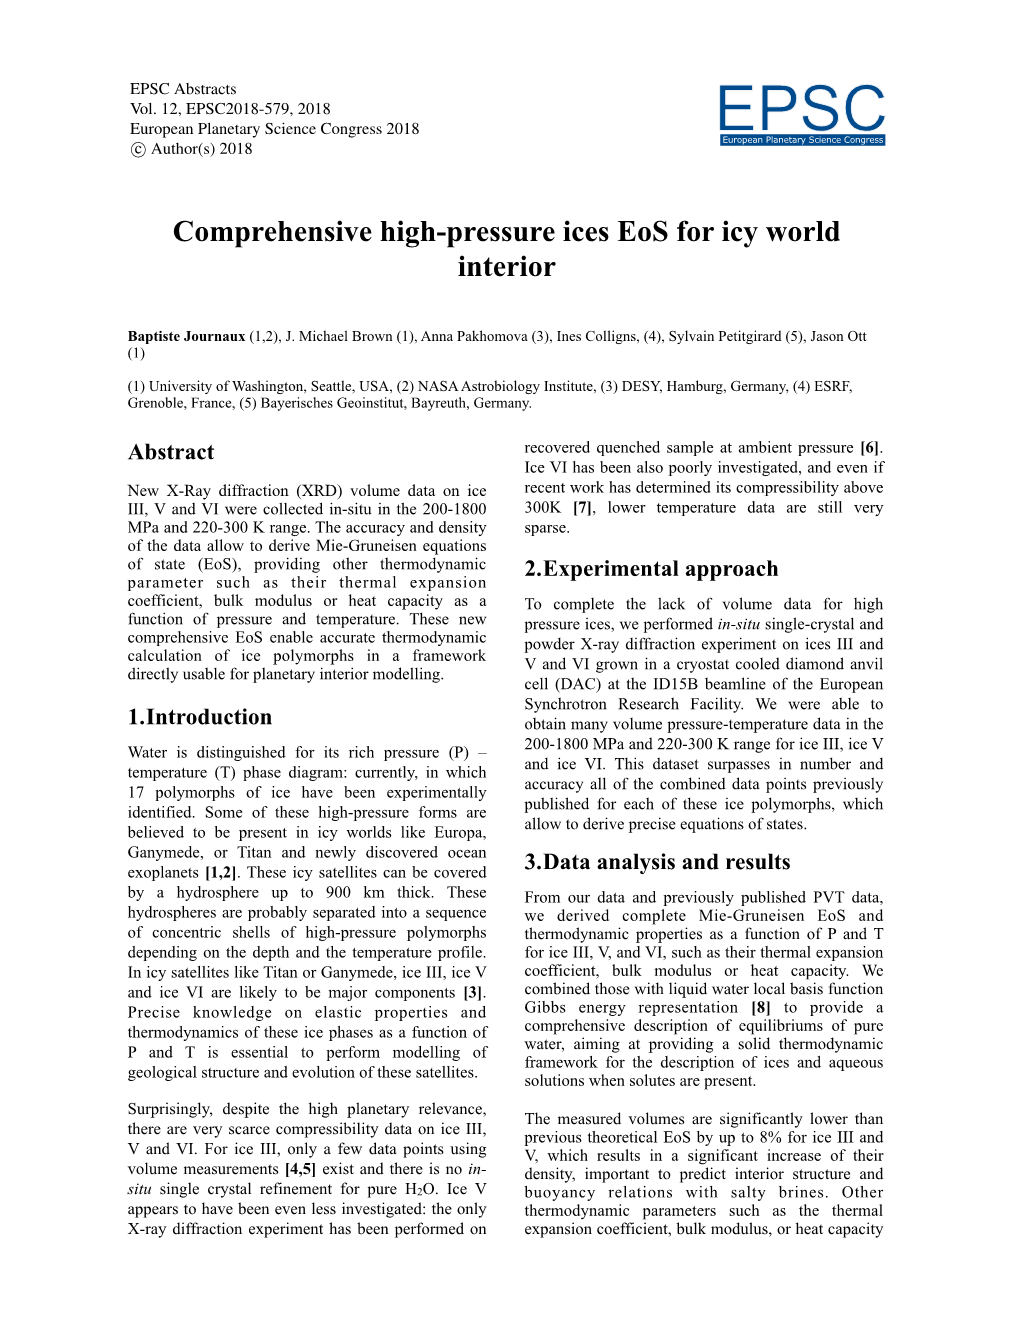 Comprehensive High-Pressure Ices Eos for Icy World Interior